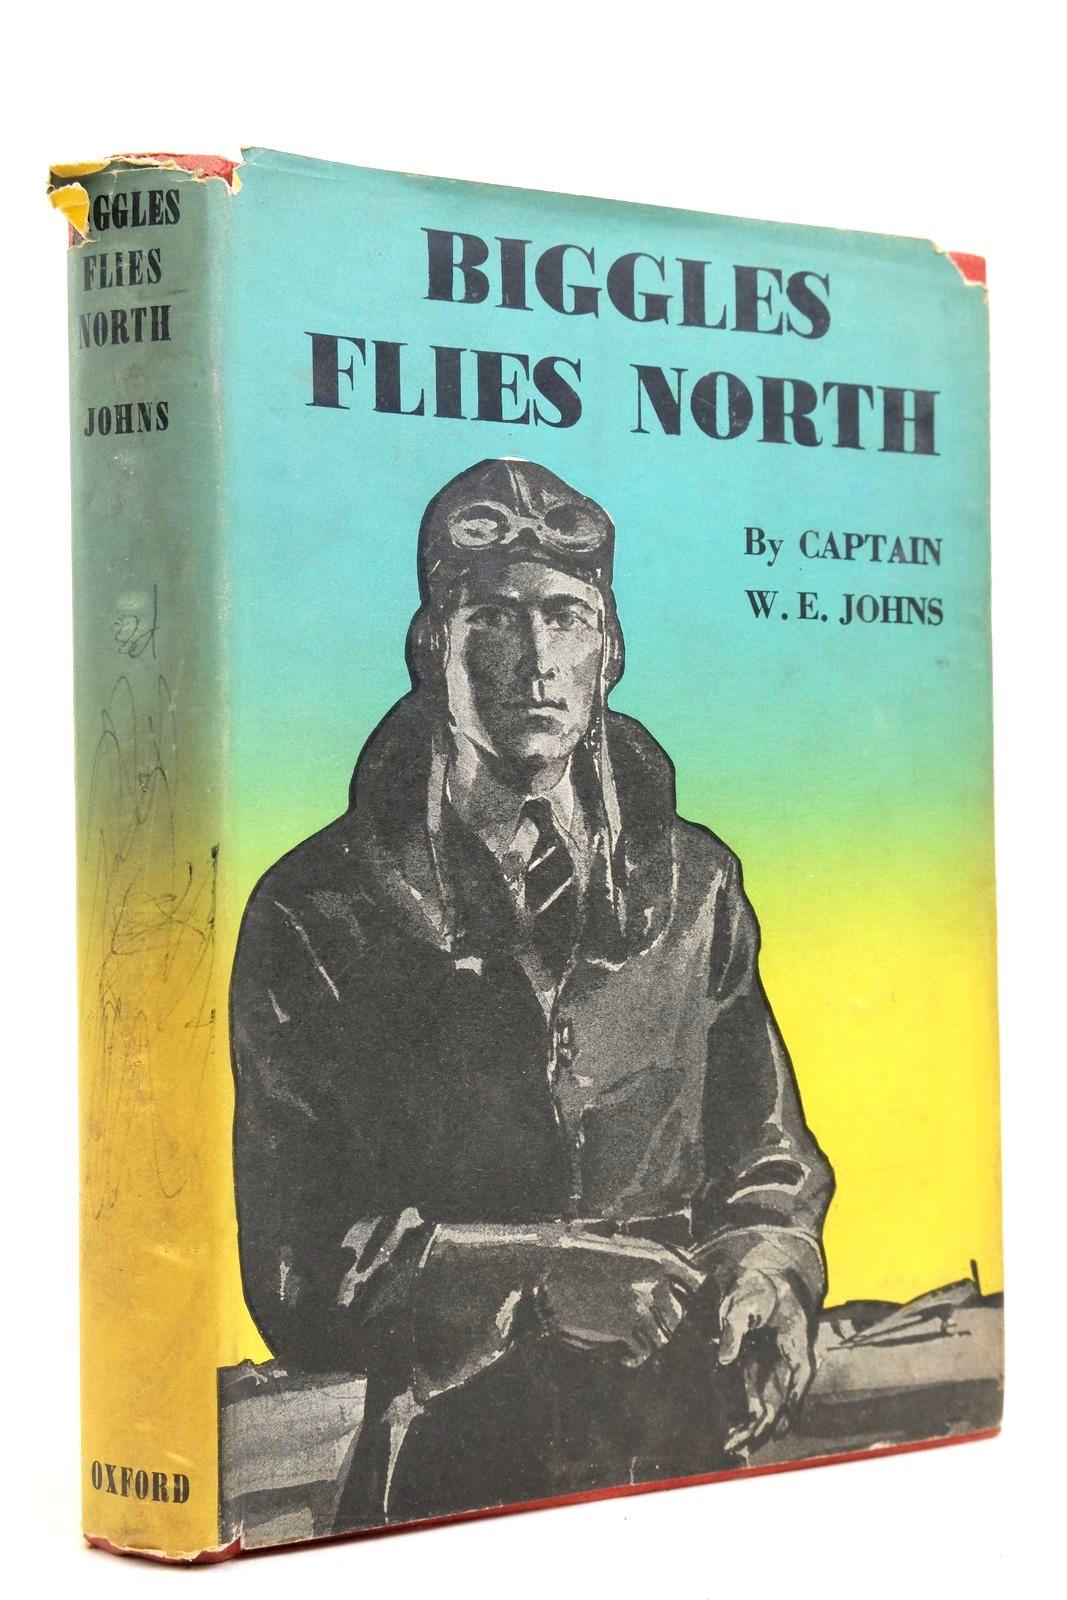 Photo of BIGGLES FLIES NORTH written by Johns, W.E. illustrated by Narraway, William published by Oxford University Press, Geoffrey Cumberlege (STOCK CODE: 2139729)  for sale by Stella & Rose's Books